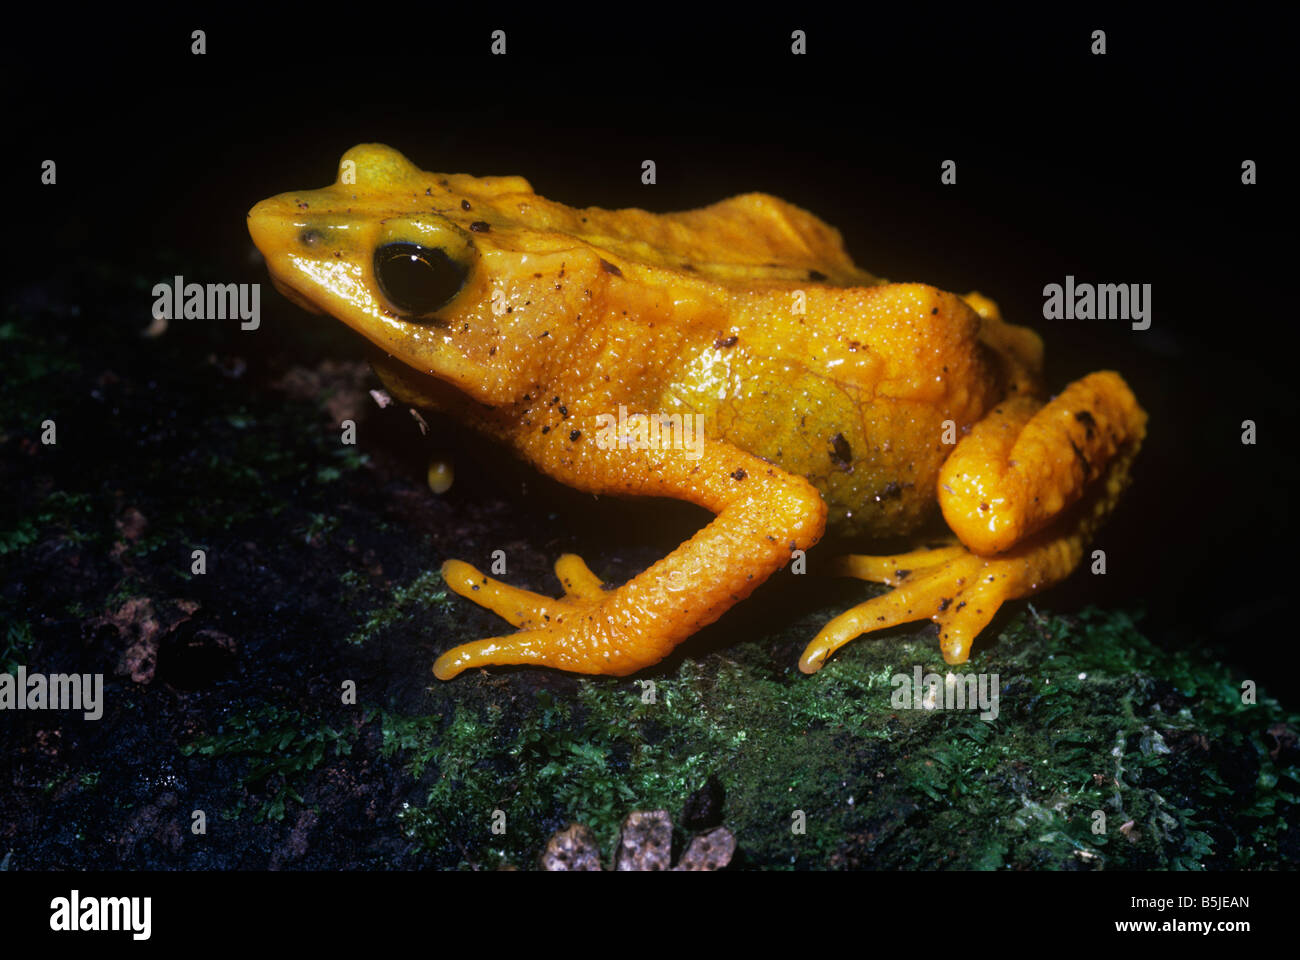 Yellow harlequin frog actually a toad Atelopus oxyrhynchus Bufonidae a warningly colored diurnal species, rainforest Venezuela Stock Photo